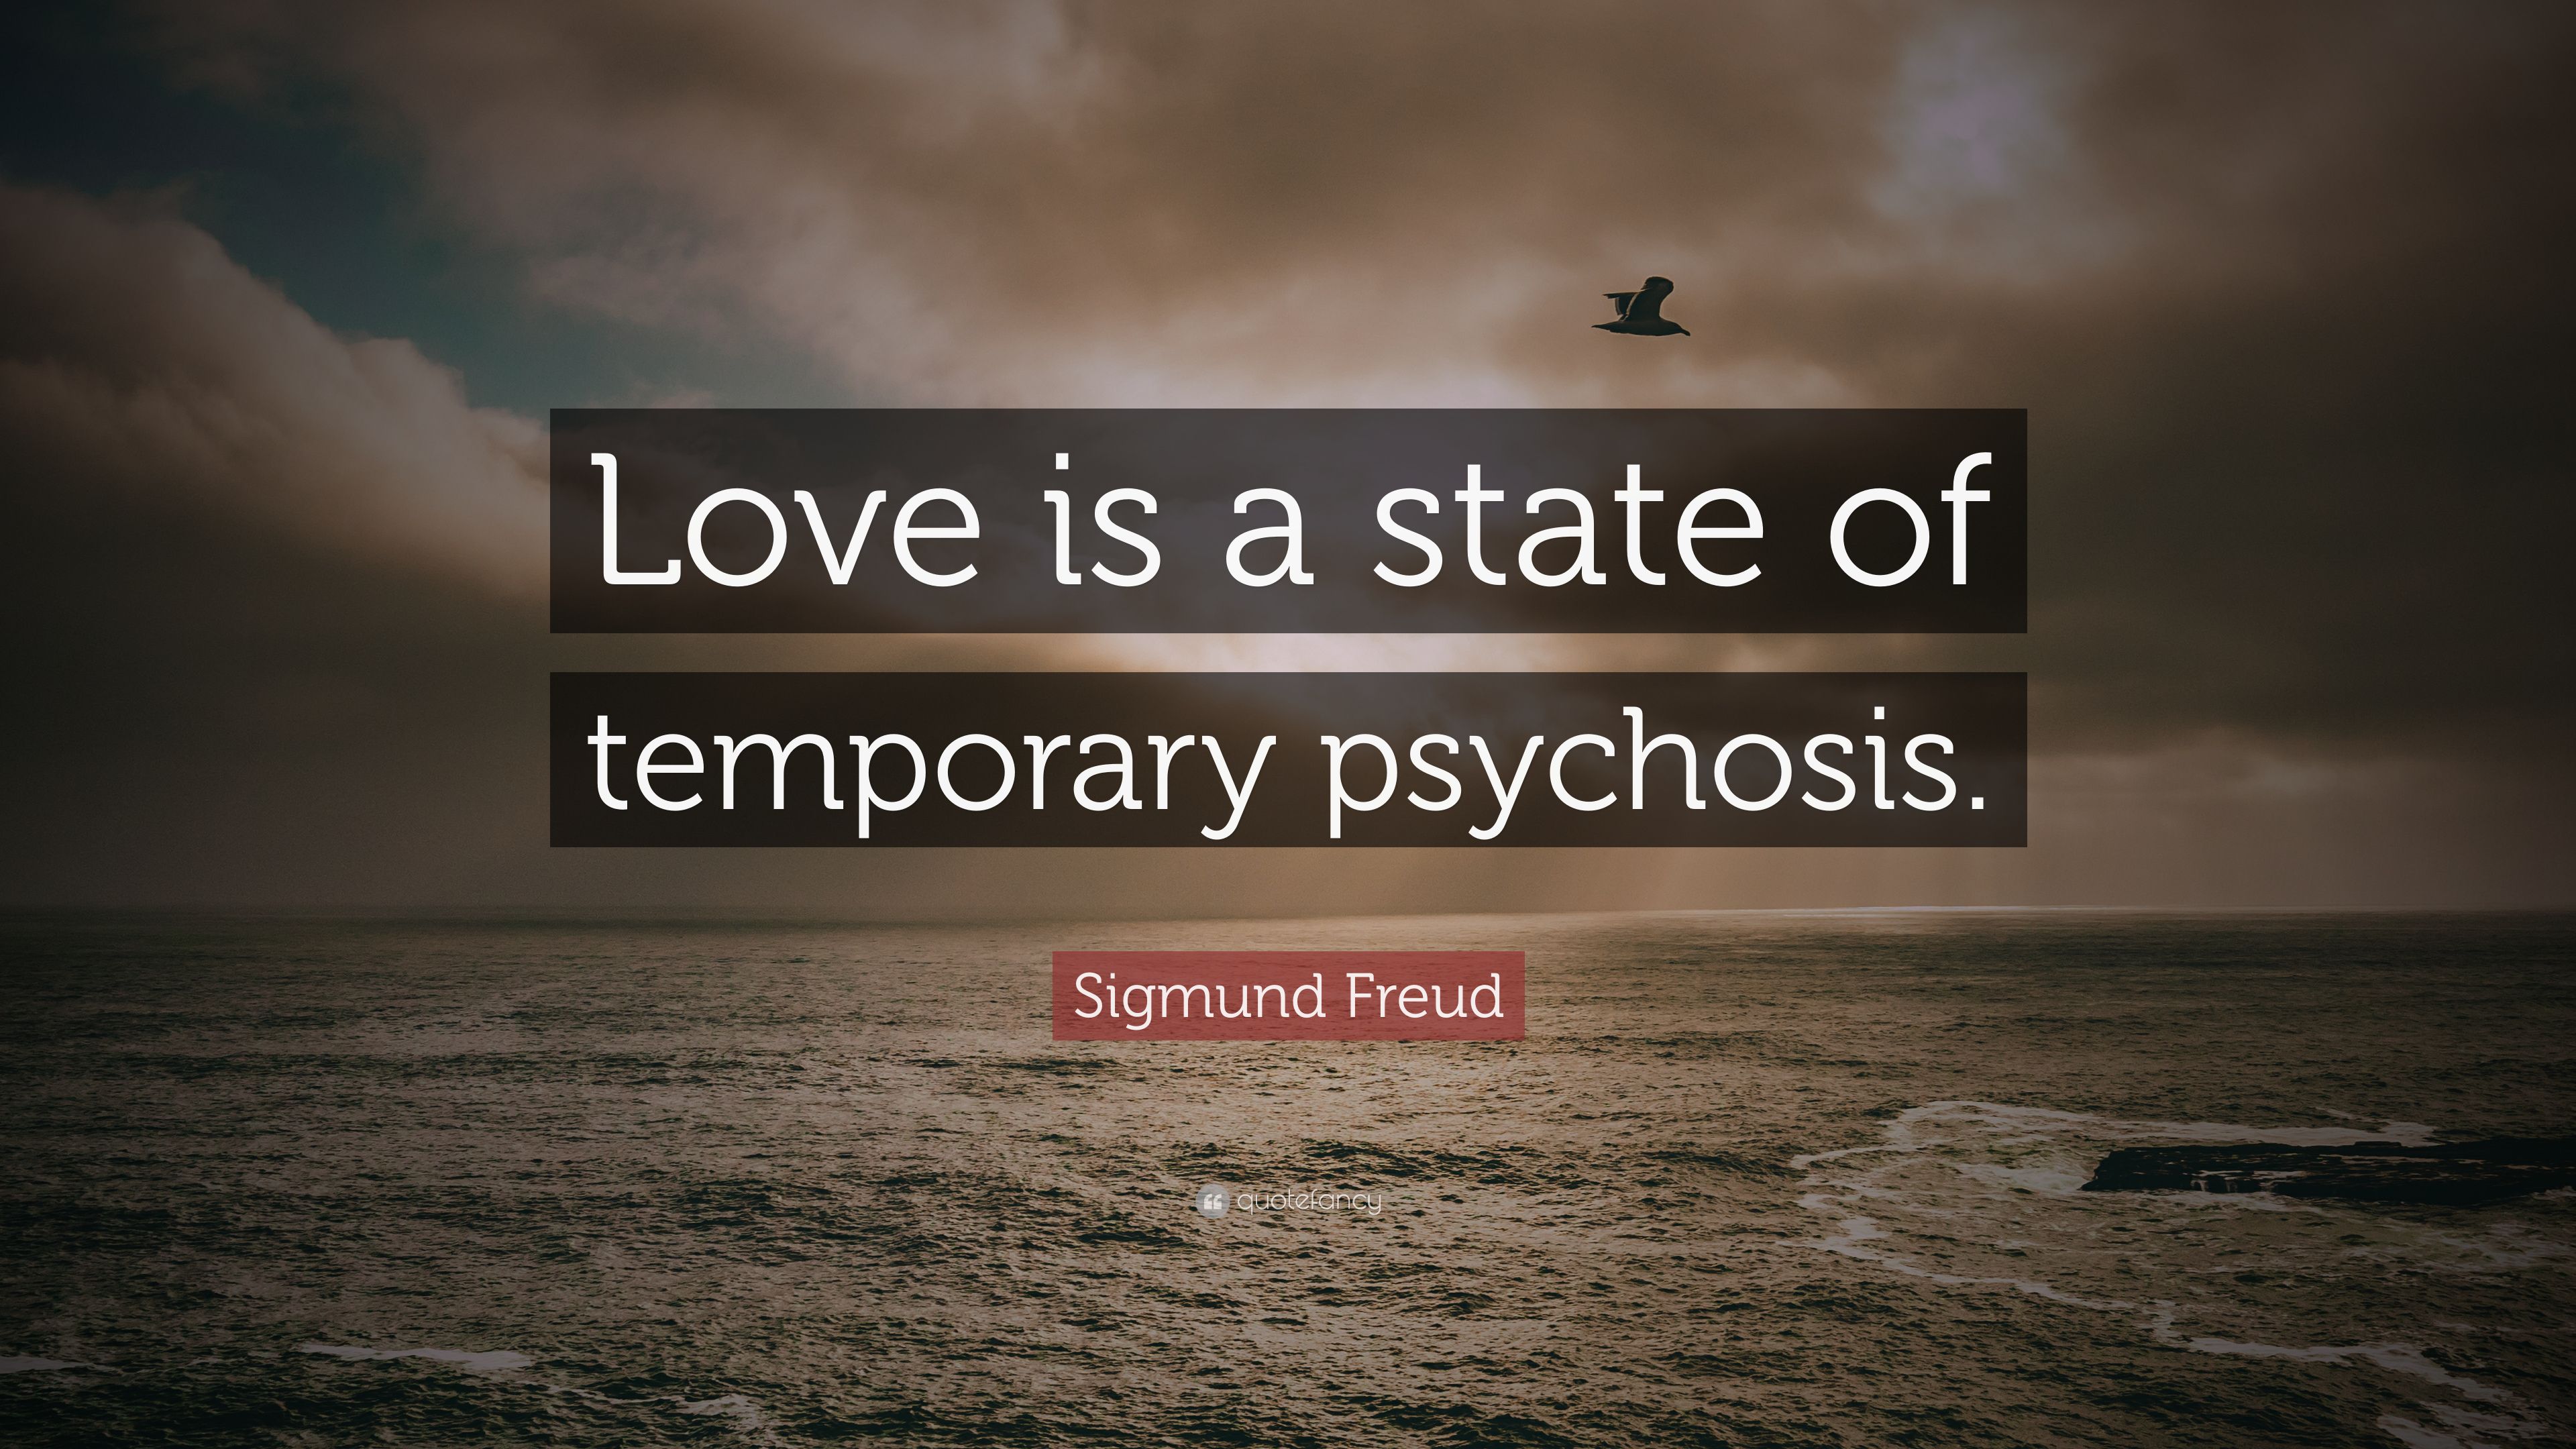 Sigmund Freud Quote: “Love is a state of temporary psychosis.” 12